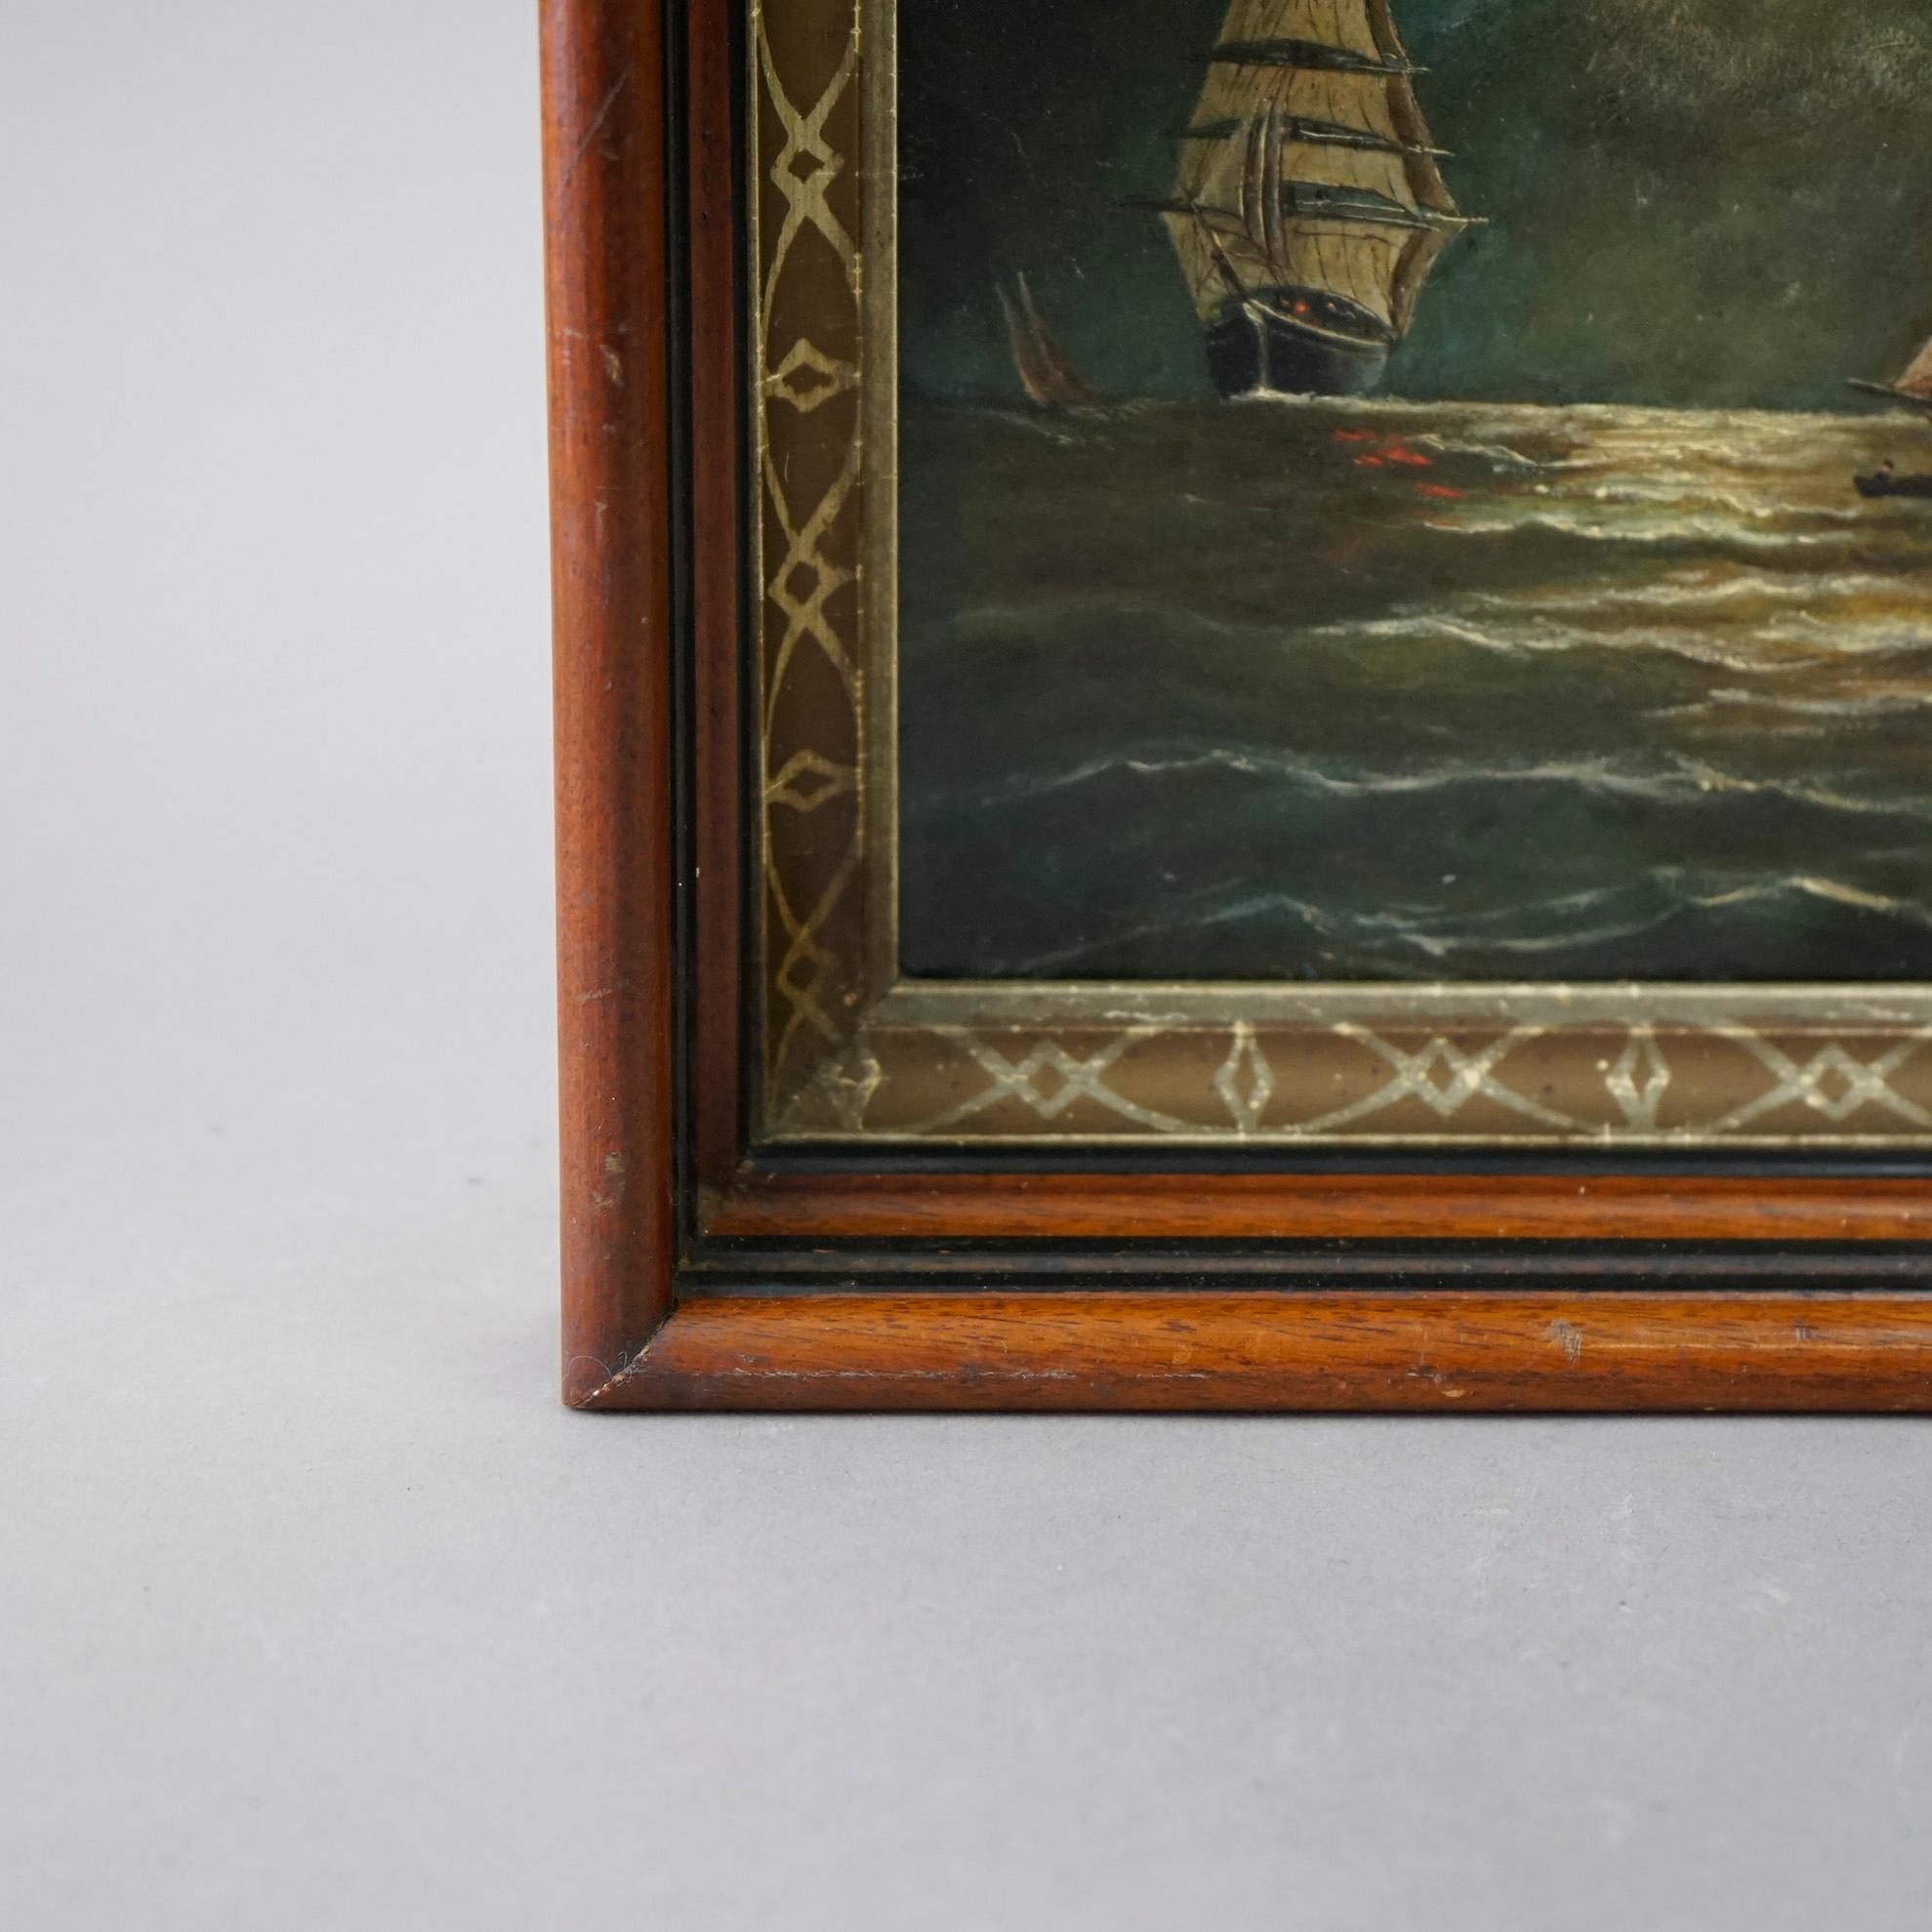 Hand-Painted Antique Nautical Painting by F. Smith in Deep Walnut Frame, Oil on Board, c1890